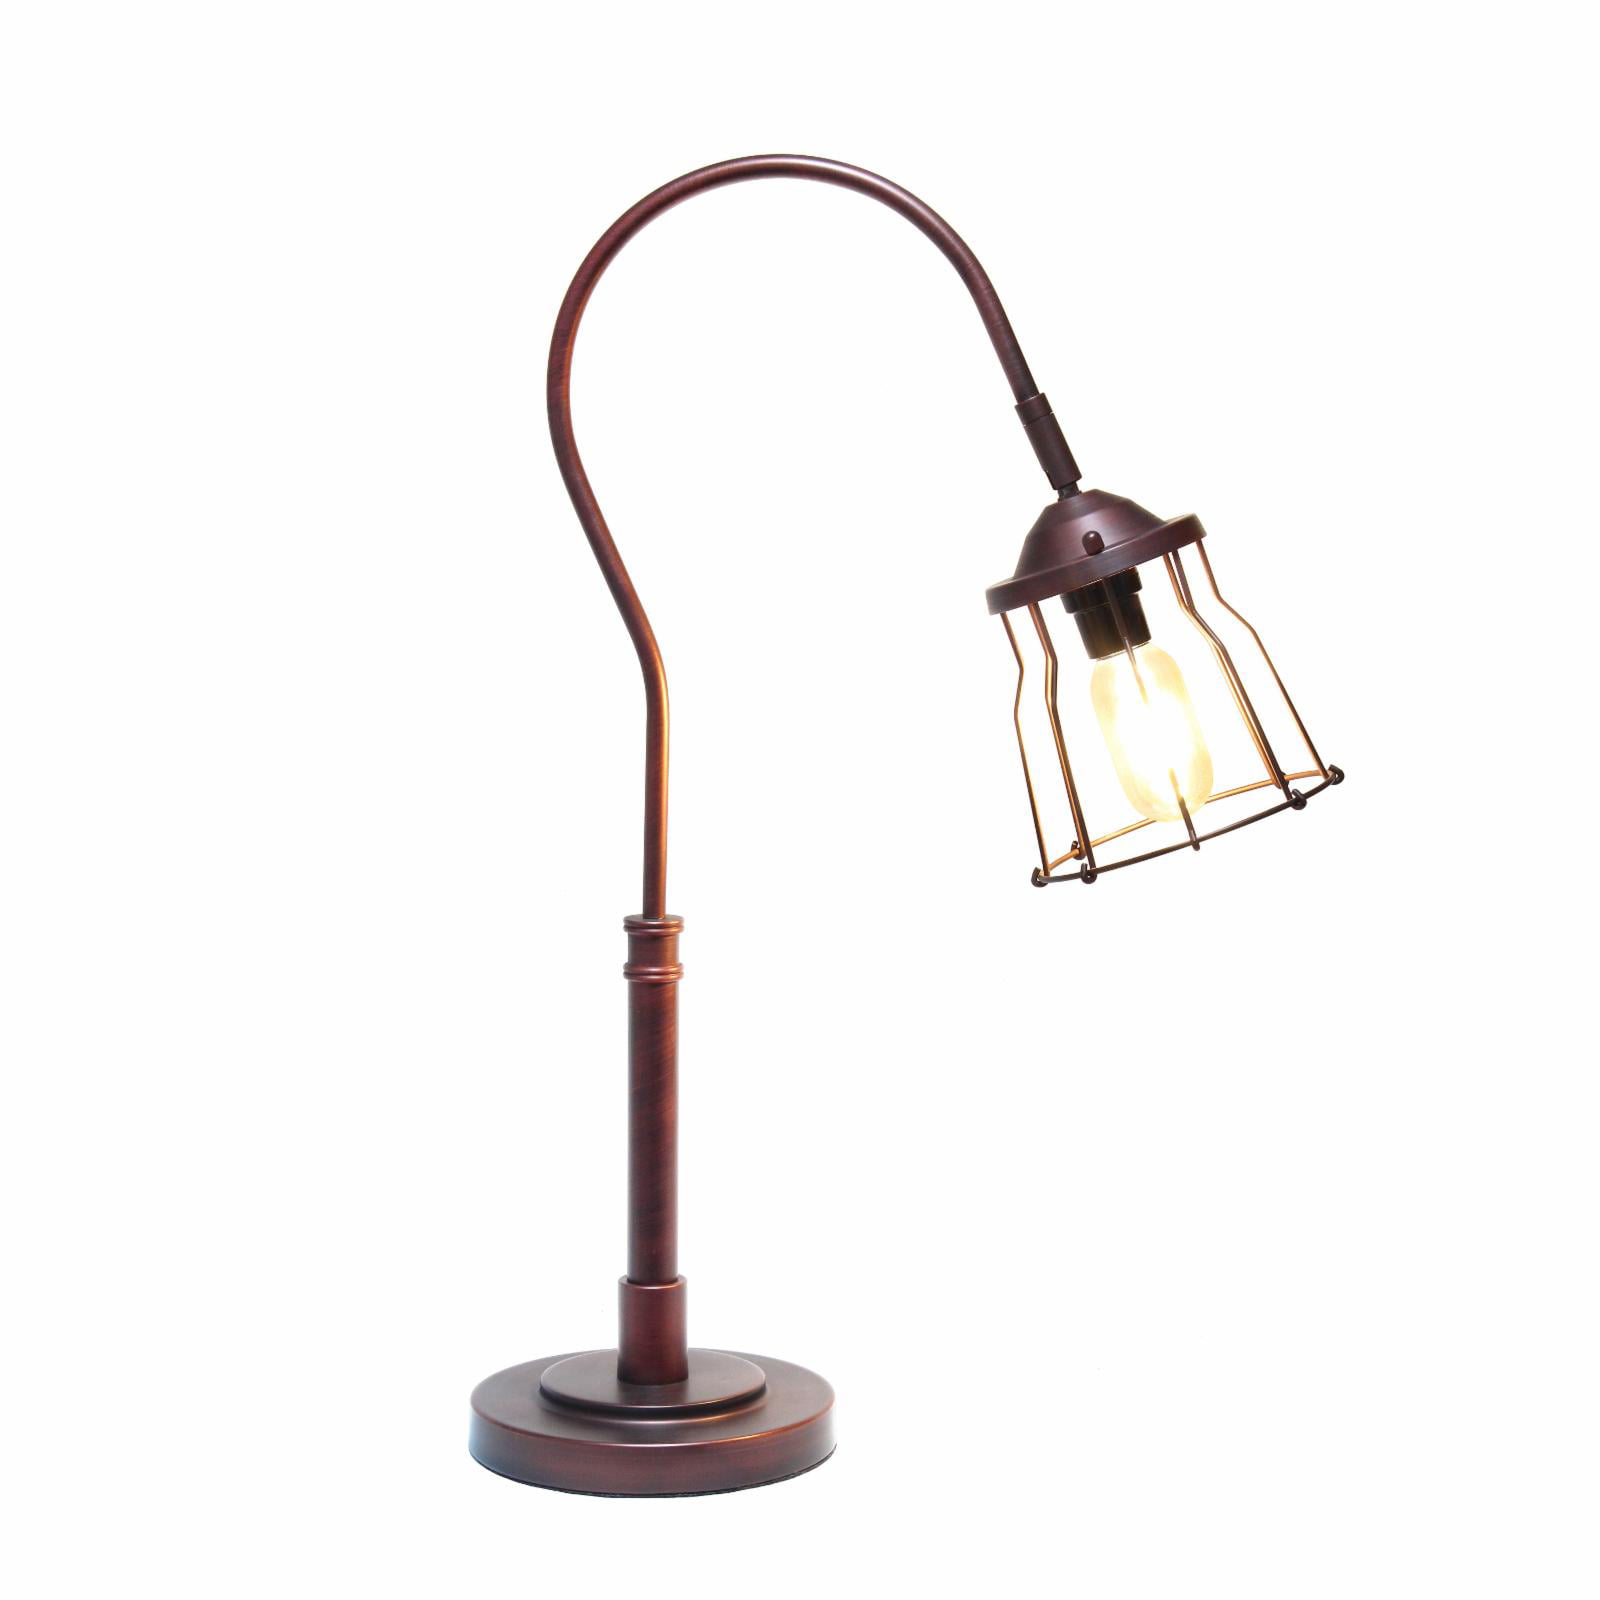 Lalia Home Rustic Caged Shade Table Lamp, Red Bronze